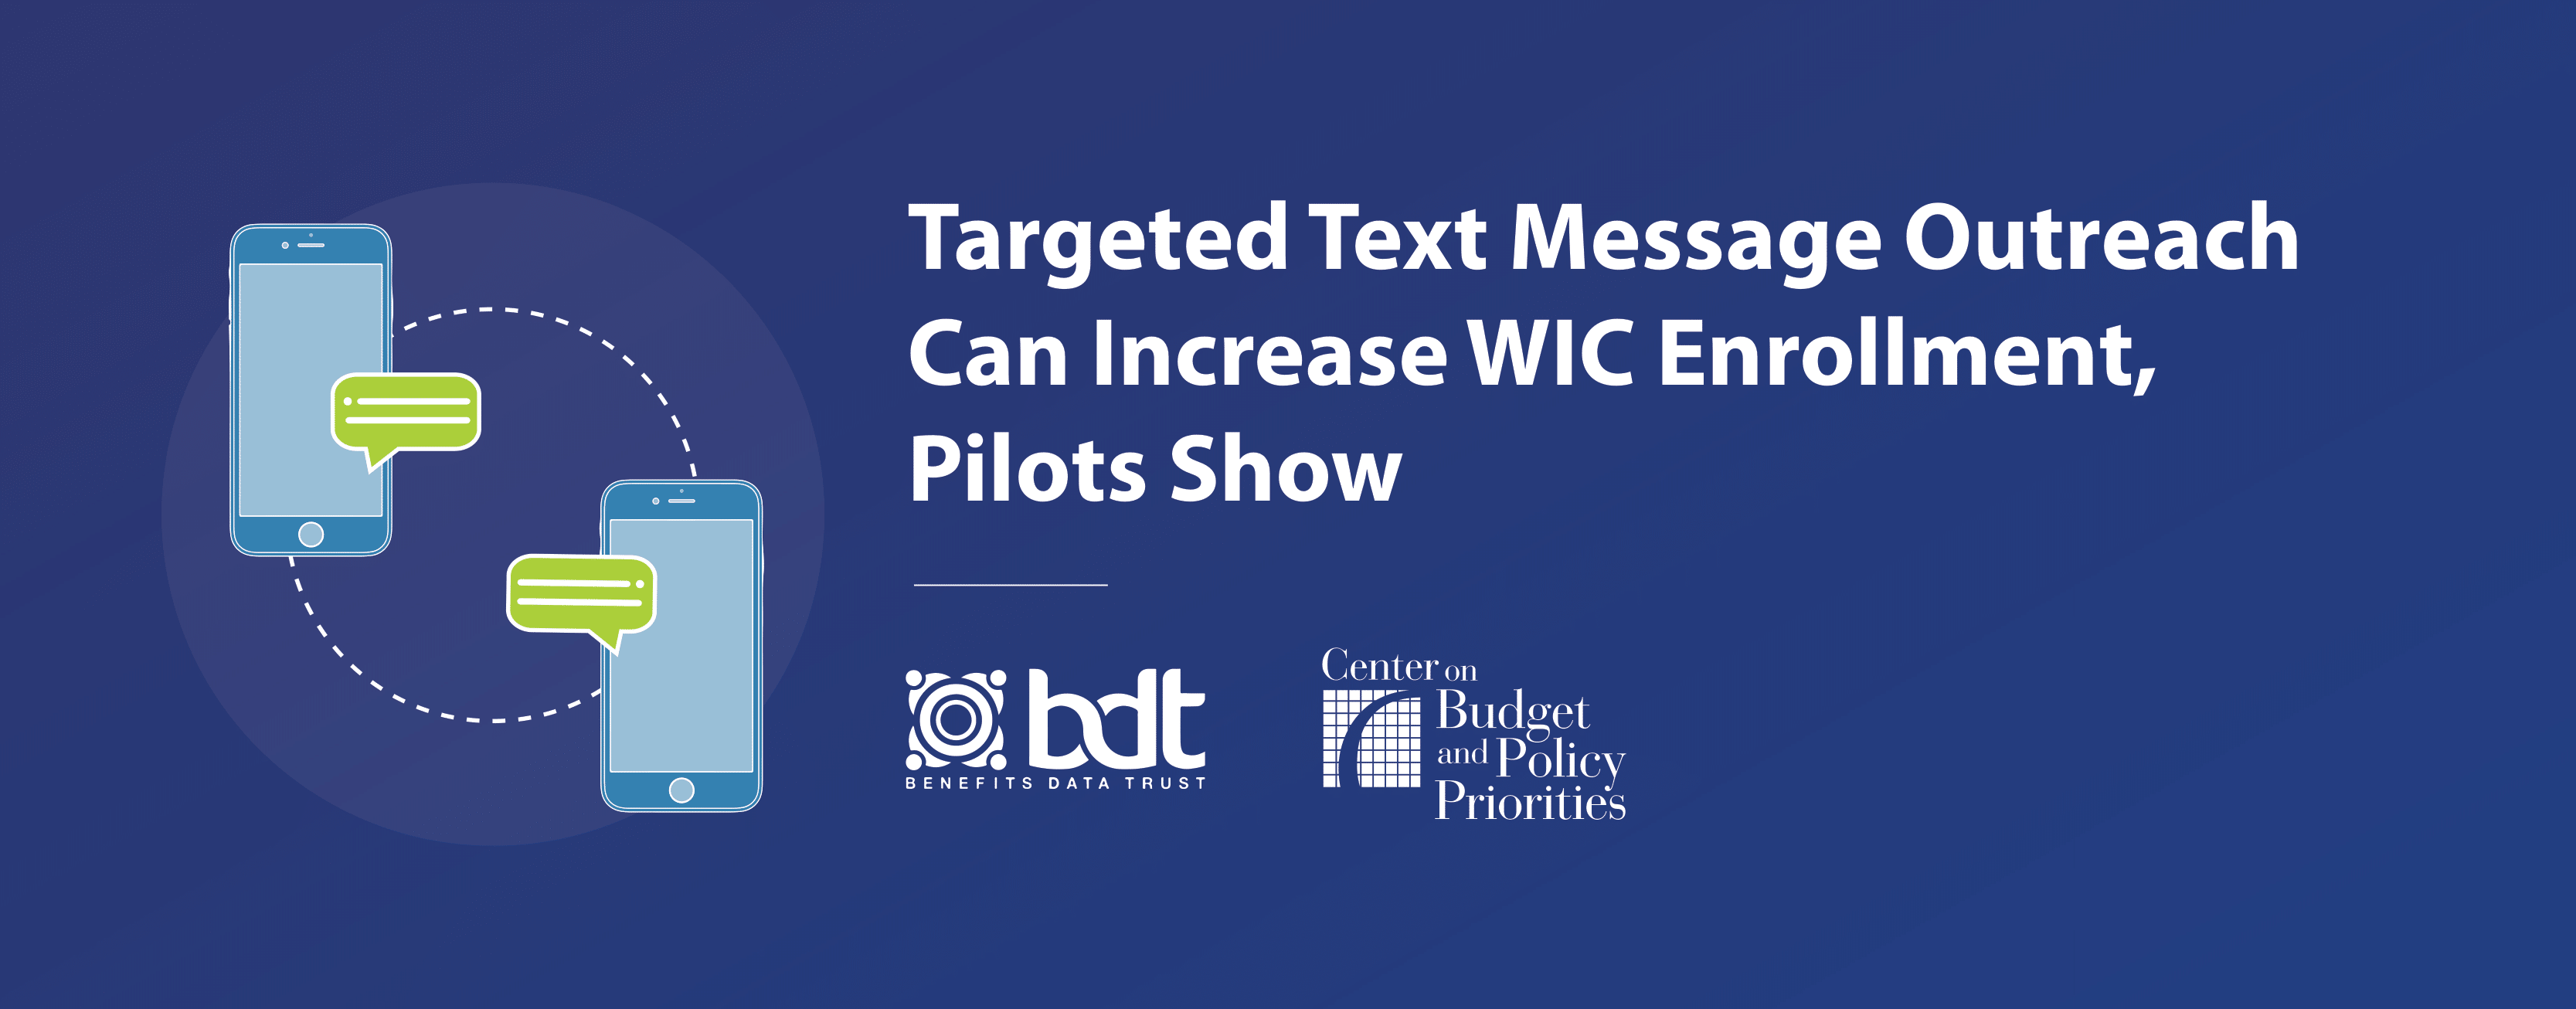 Targeted Text Message Outreach Can Increase WIC Enrollment